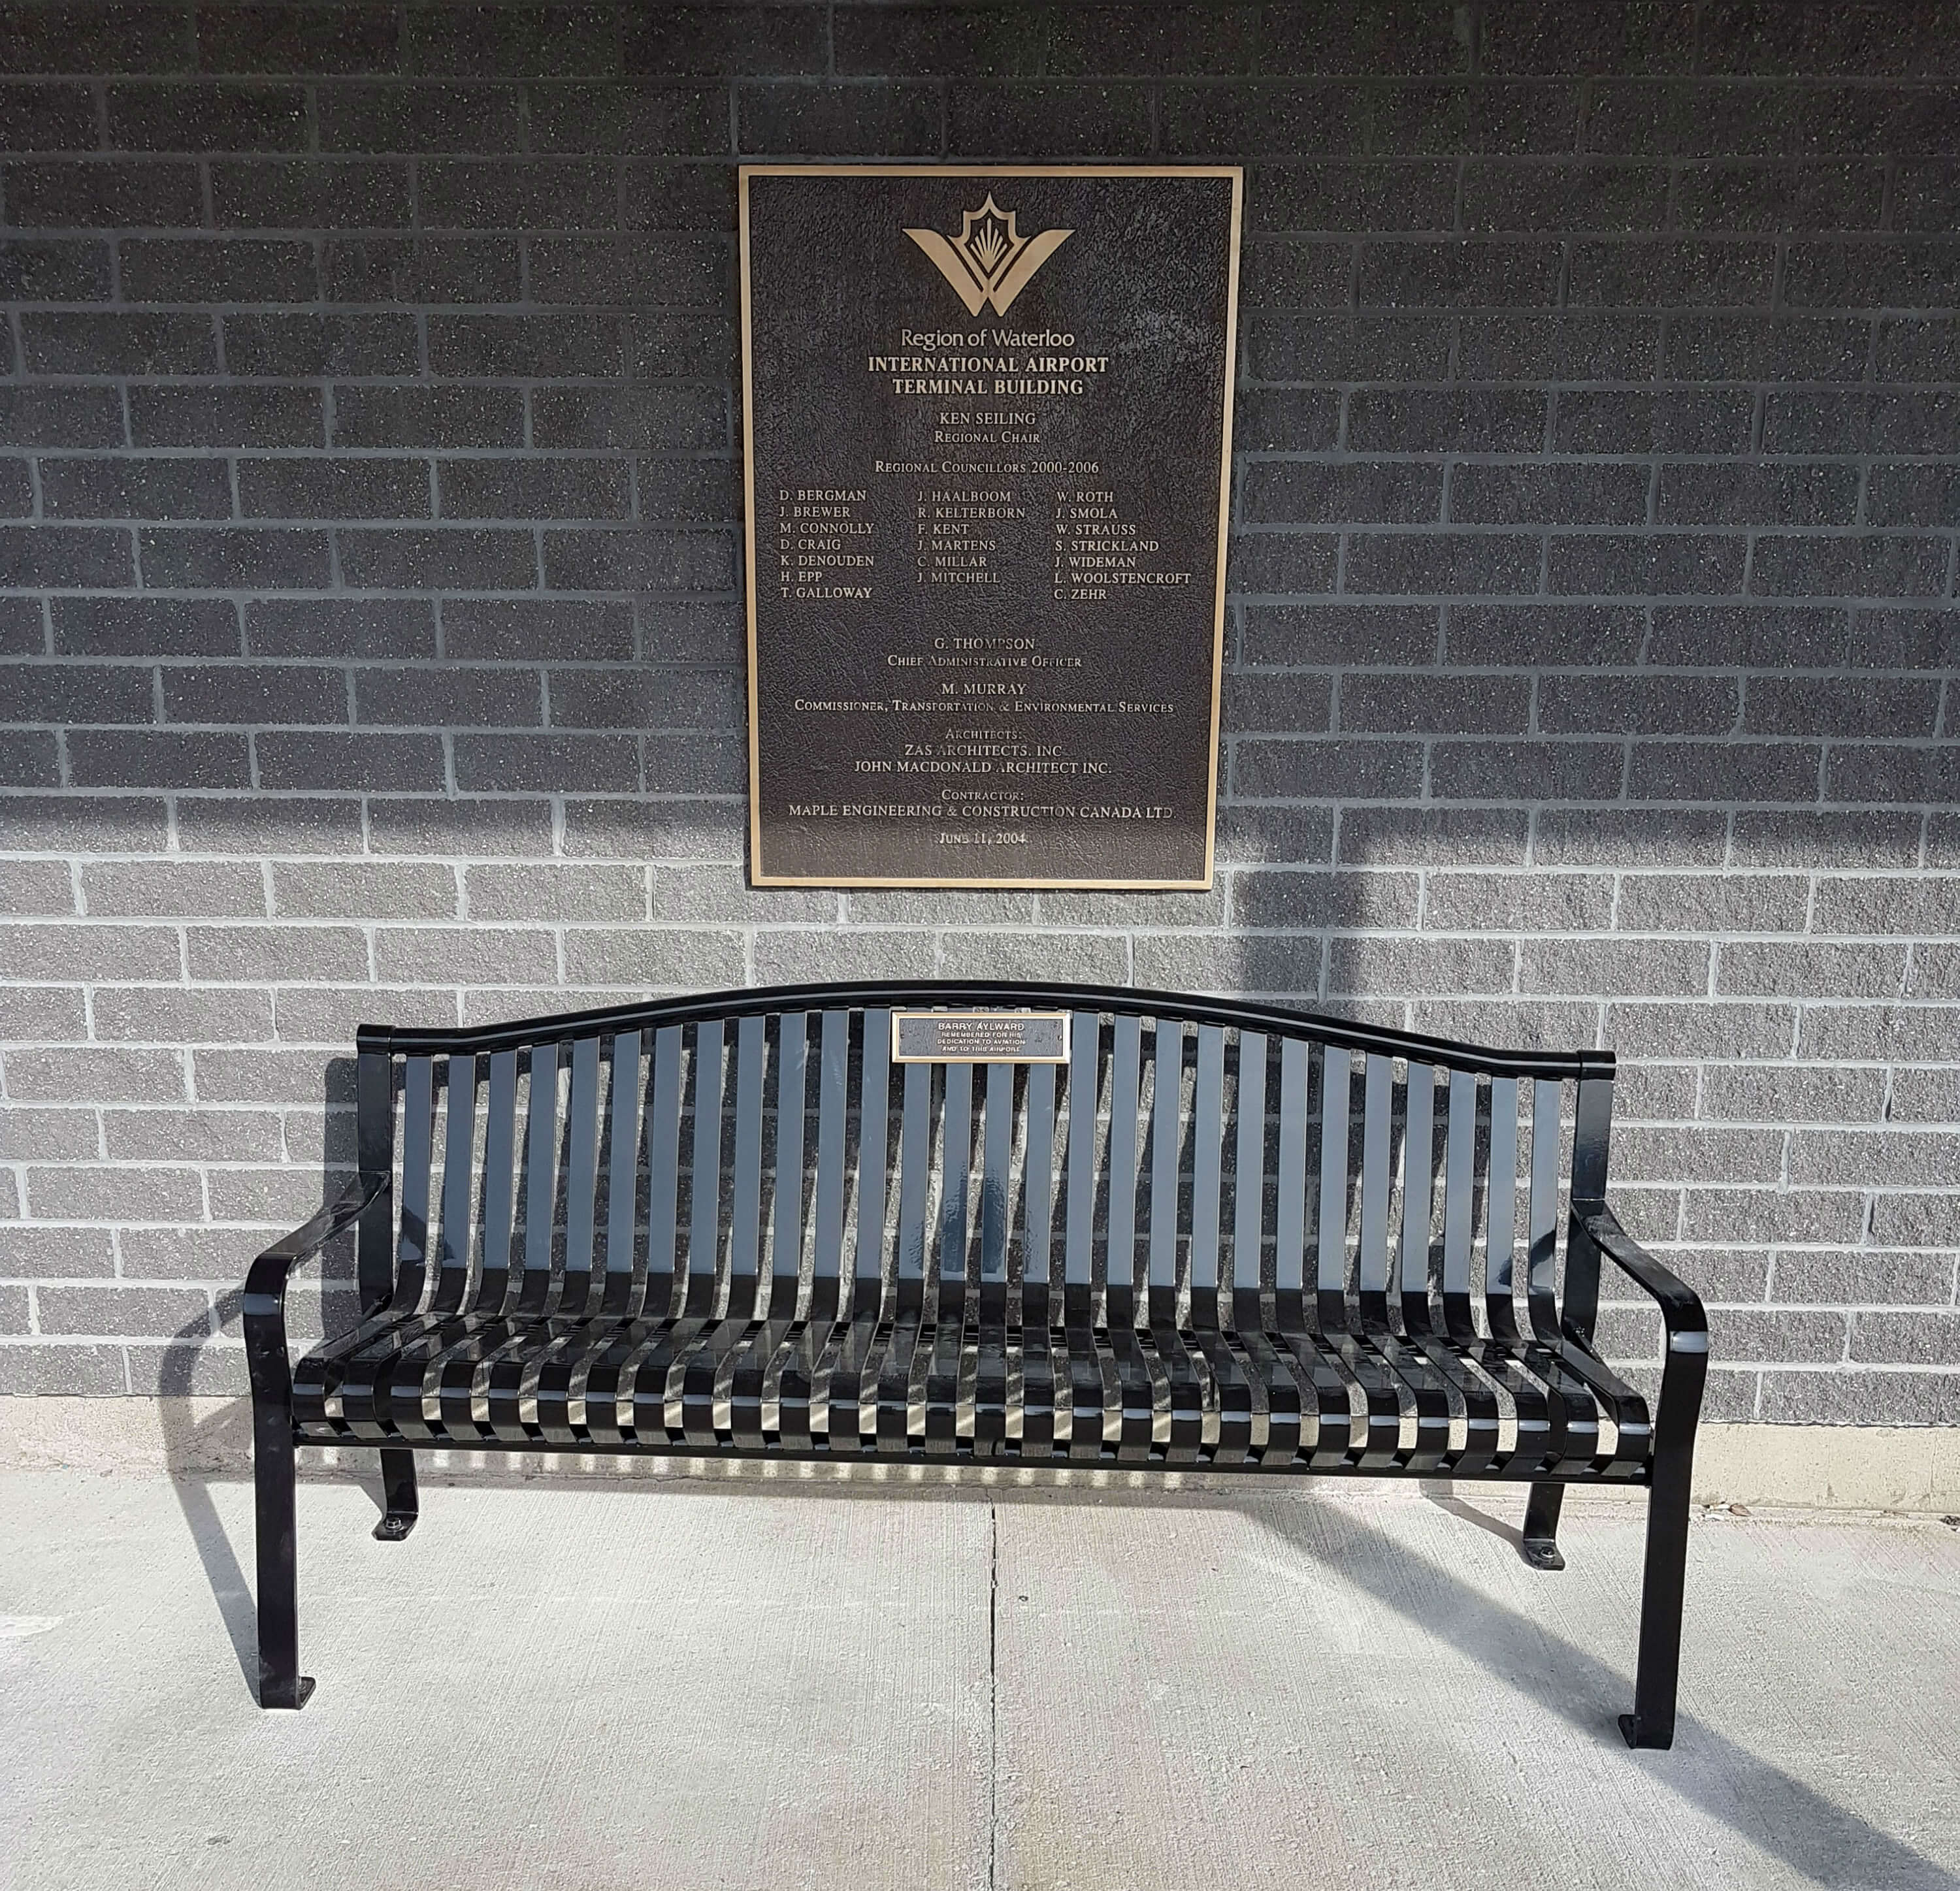 The memorial bench that pays tribute to Barry Aylward was installed in front of the terminal at the Region of Waterloo International Airport. Kitchener Aero Photo